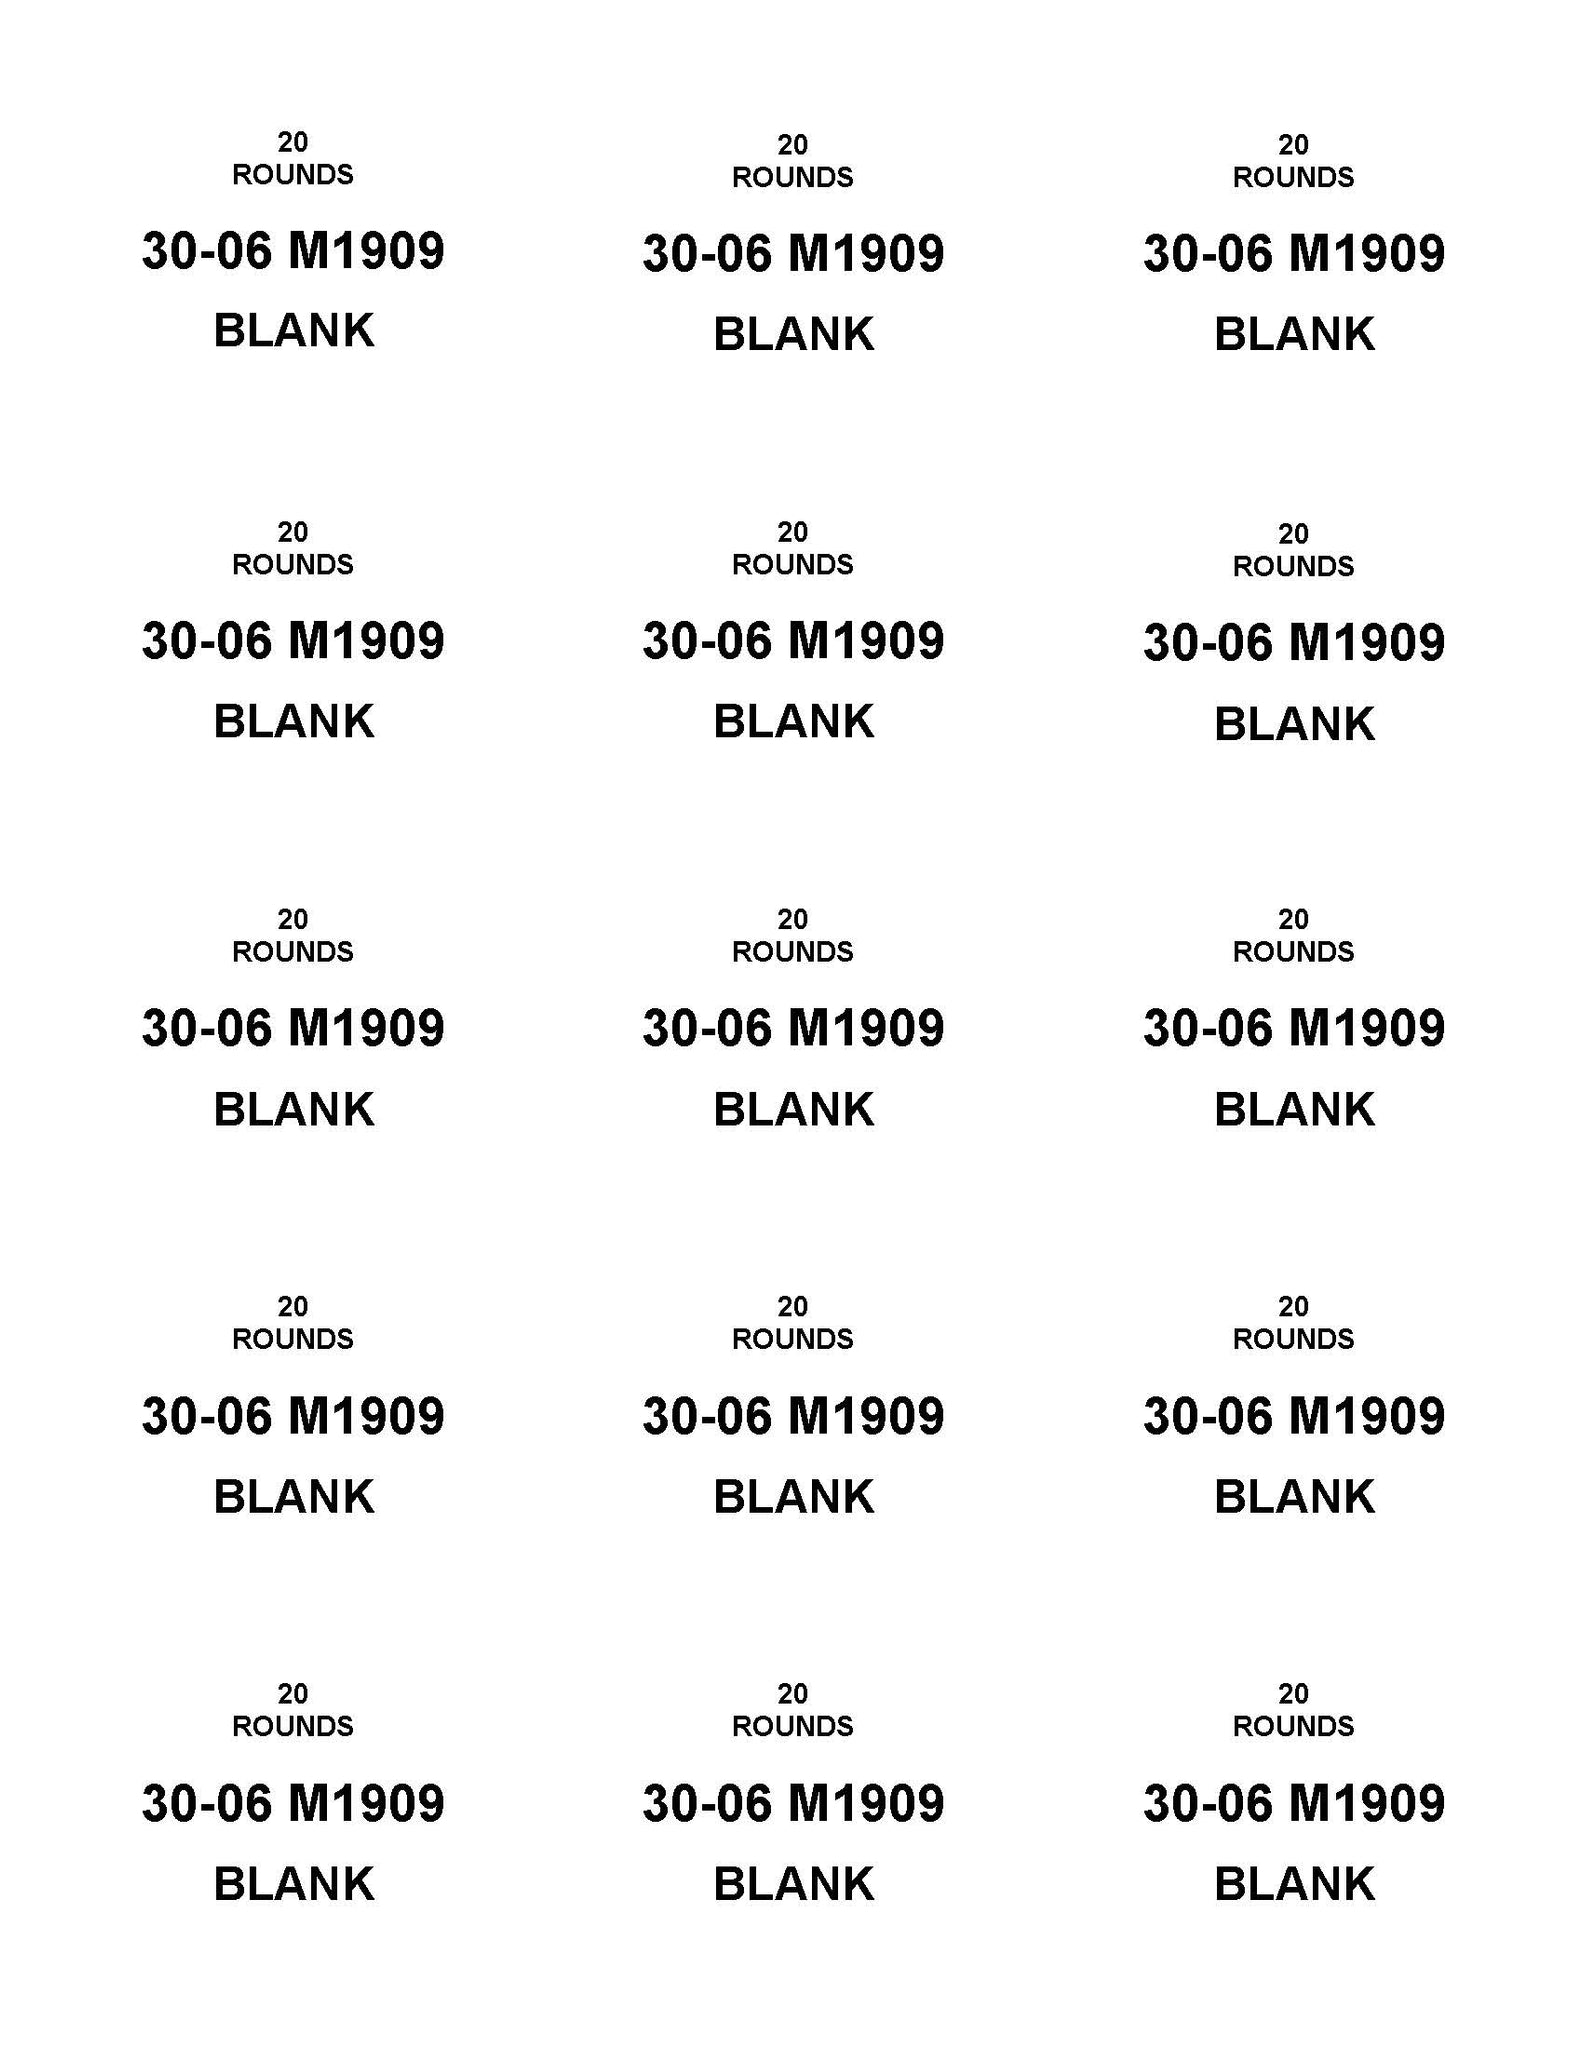 Labels: 30-06 M1909 Blank